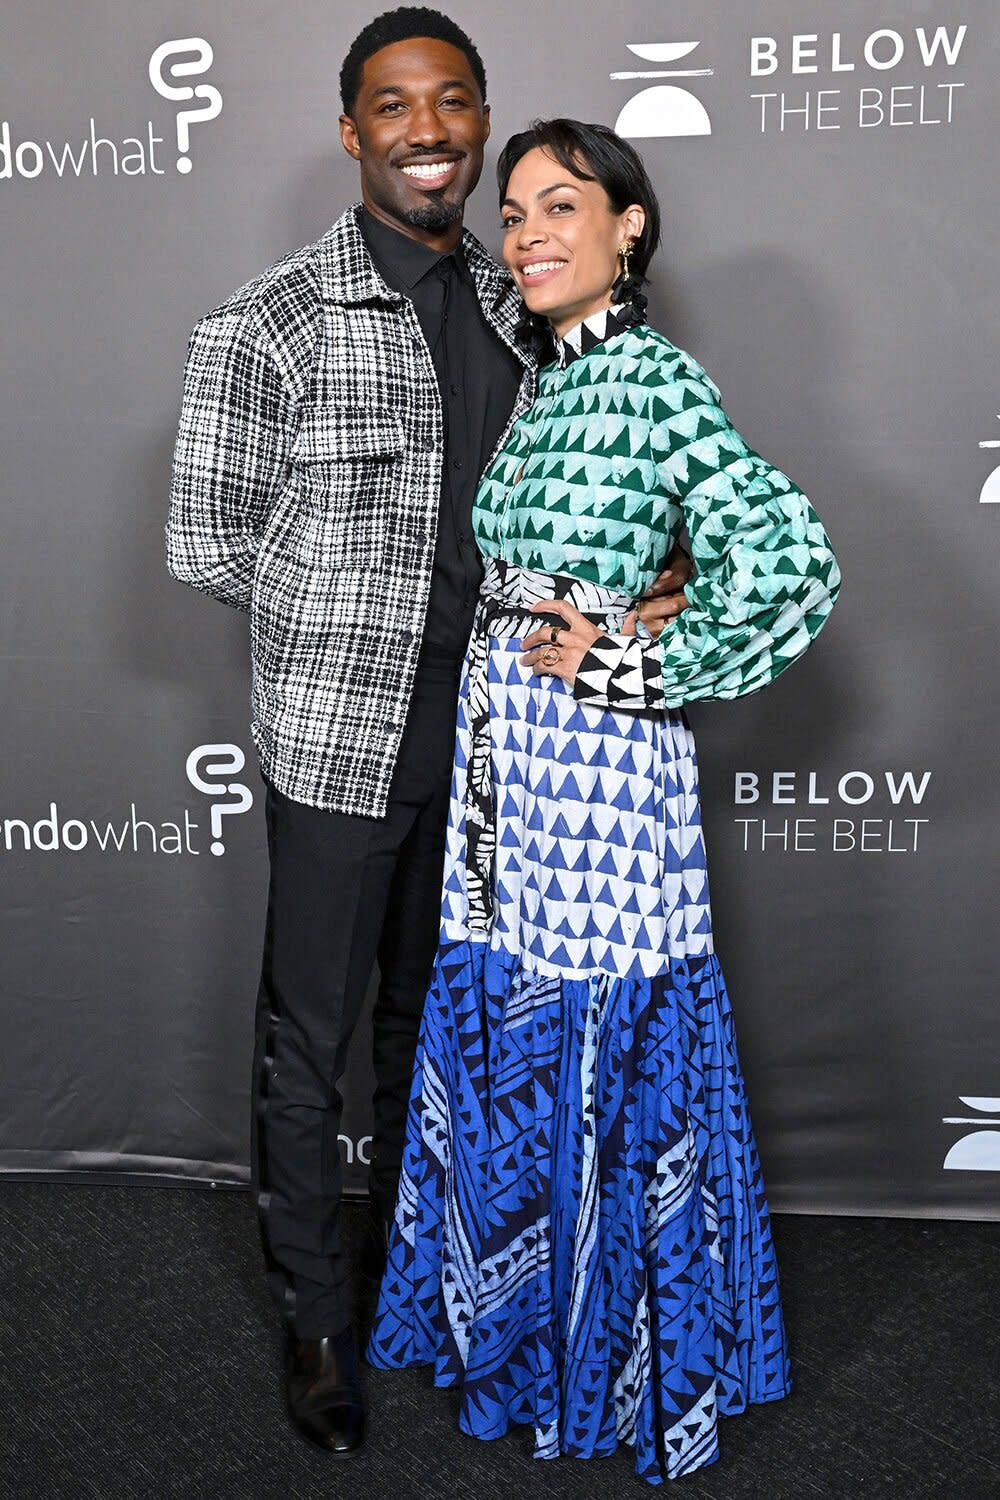 Nnamdi Okafor and Rosario Dawson attend the Los Angeles Screening of "Below The Belt" at Directors Guild Of America on October 01, 2022 in Los Angeles, California.